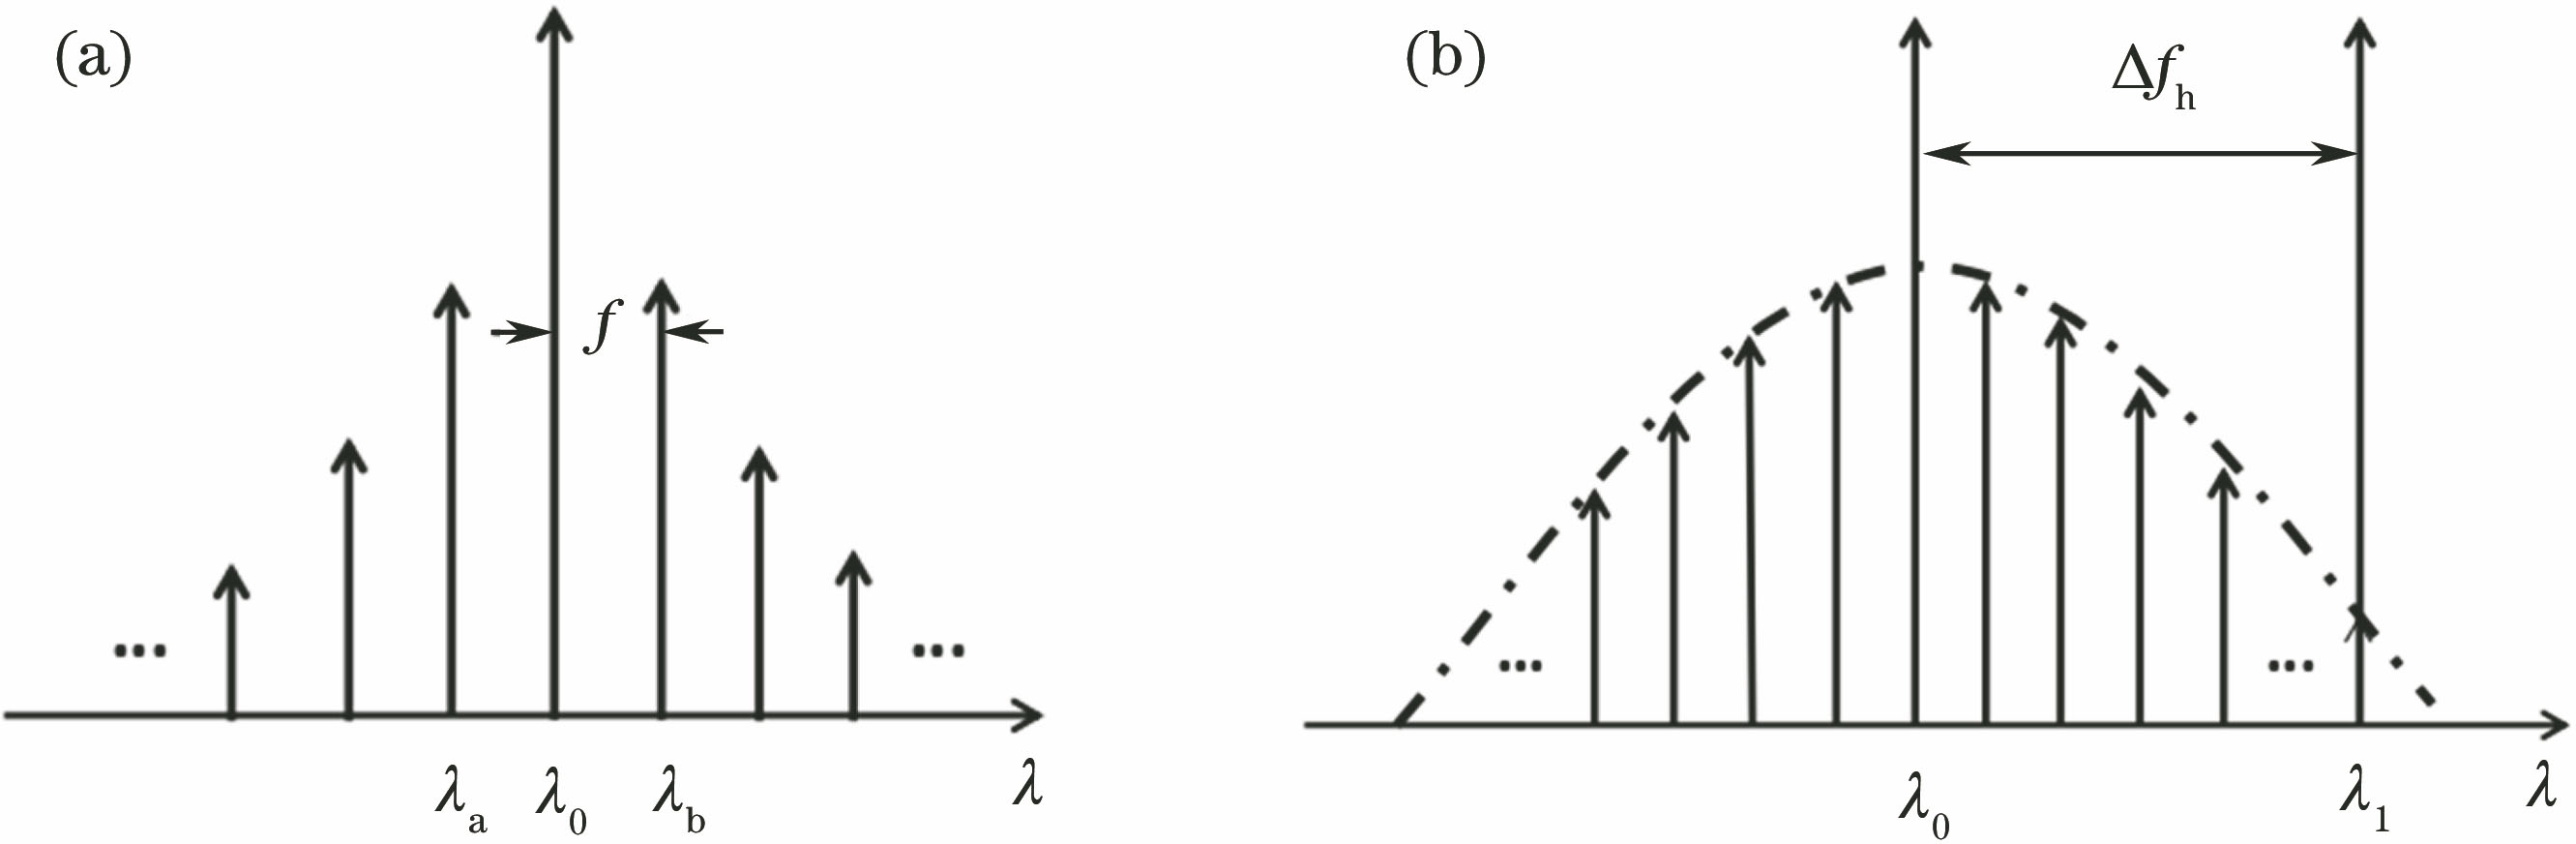 Spectra in injection locking. (a) Output spectrum of ML after modulation; (b) output spectrum of SL after injection locking